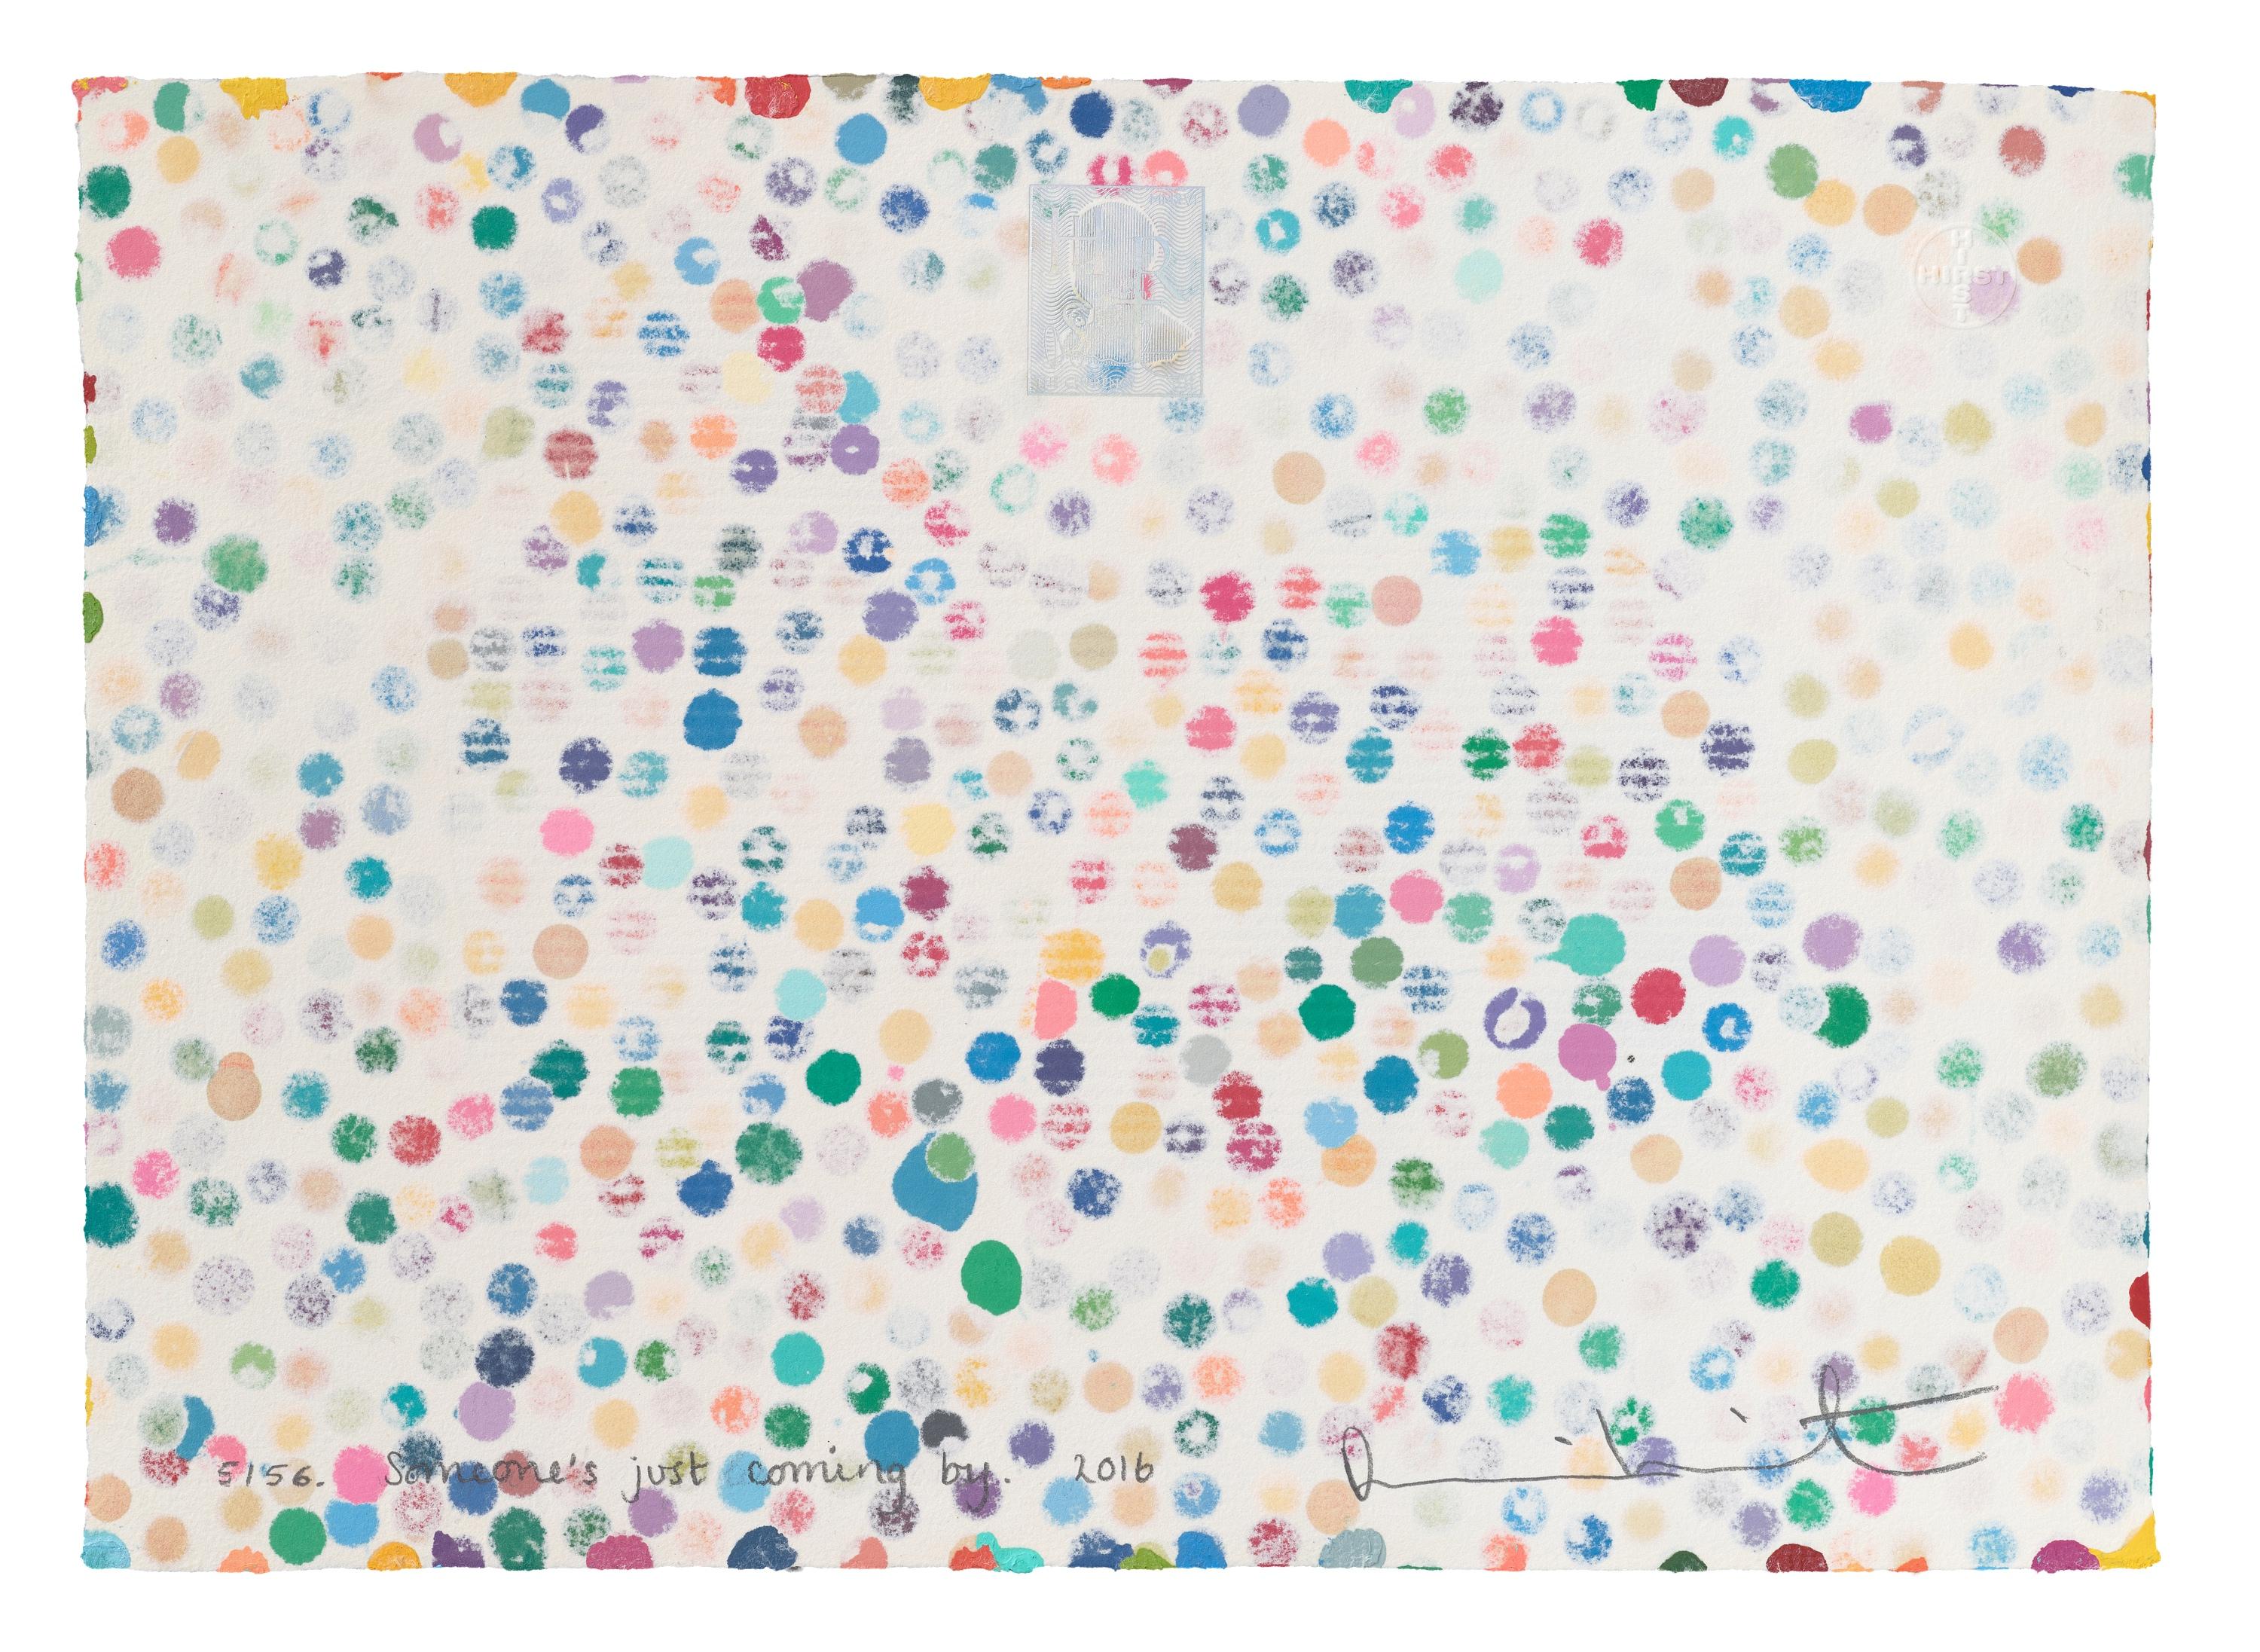 Currency- Someone’s just coming by - Painting by Damien Hirst